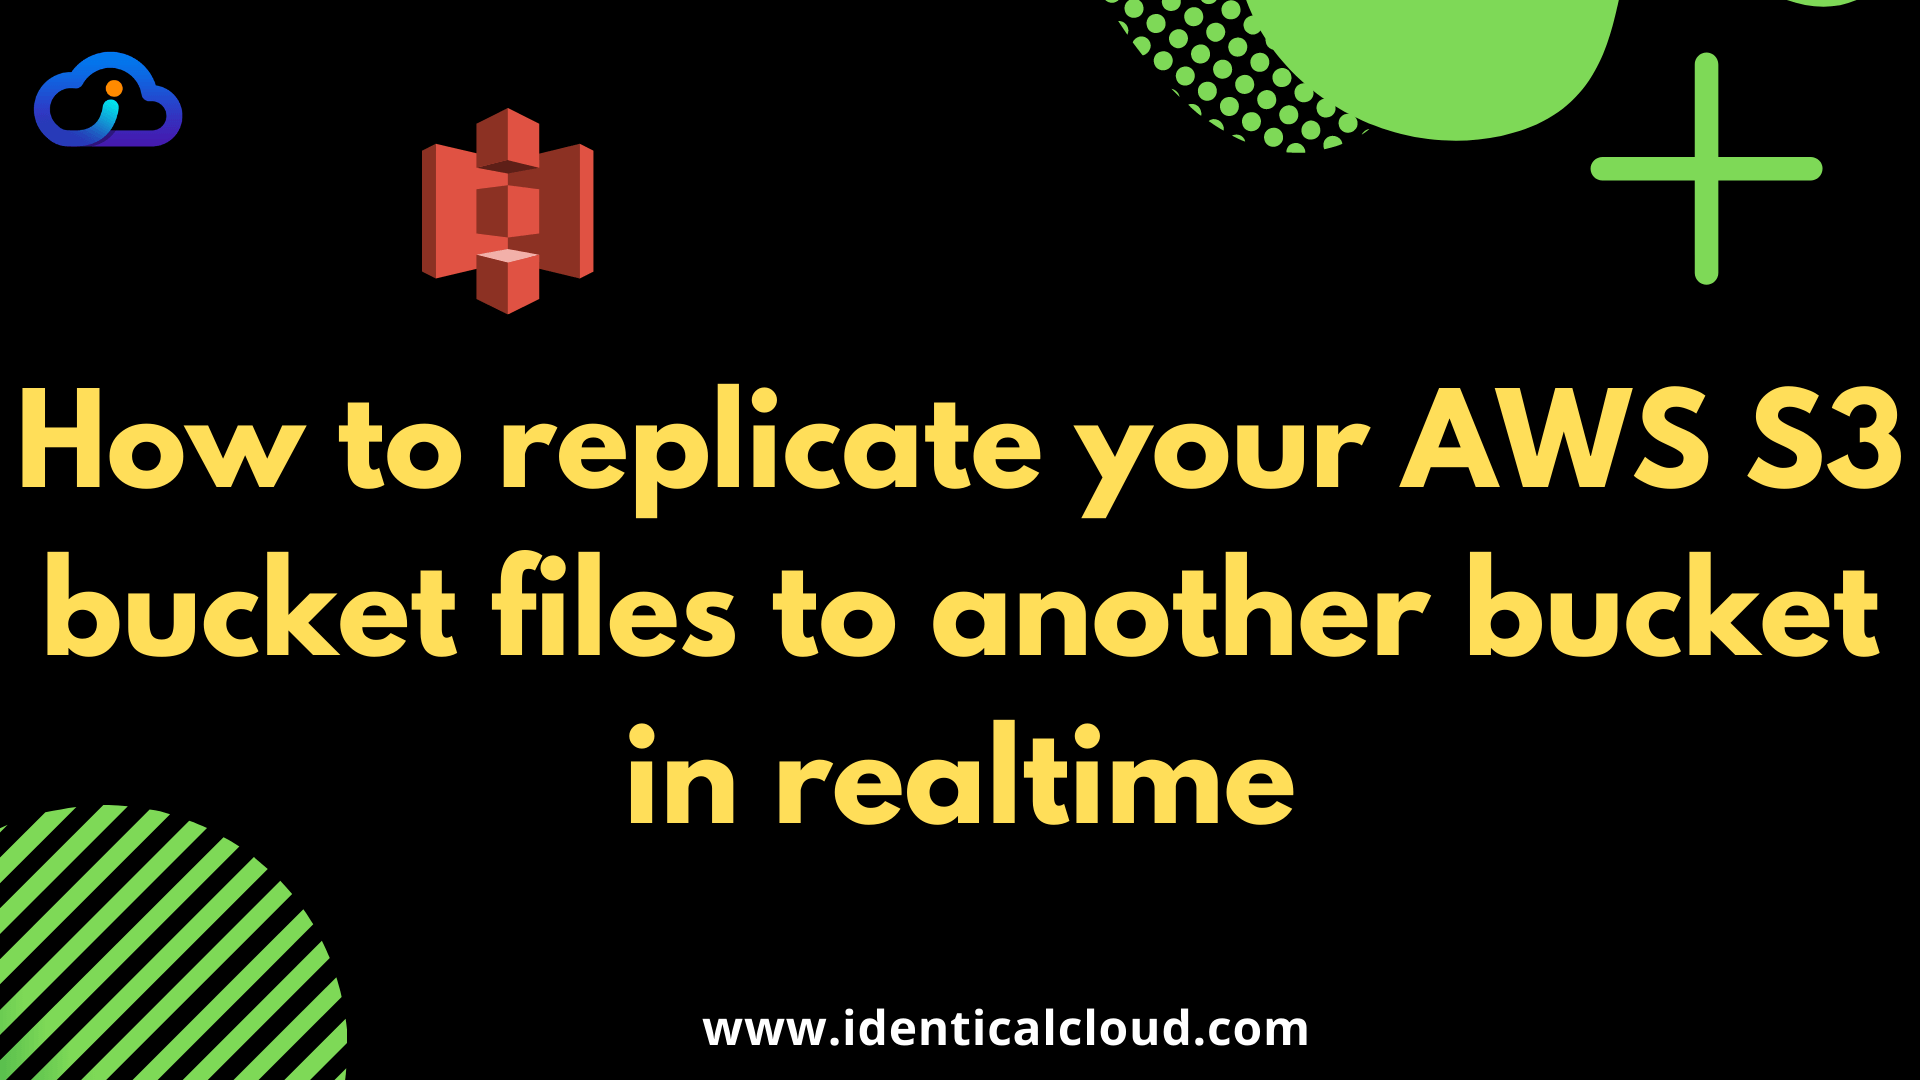 how-to-replicate-your-aws-s3-bucket-files-to-another-bucket-in-realtime